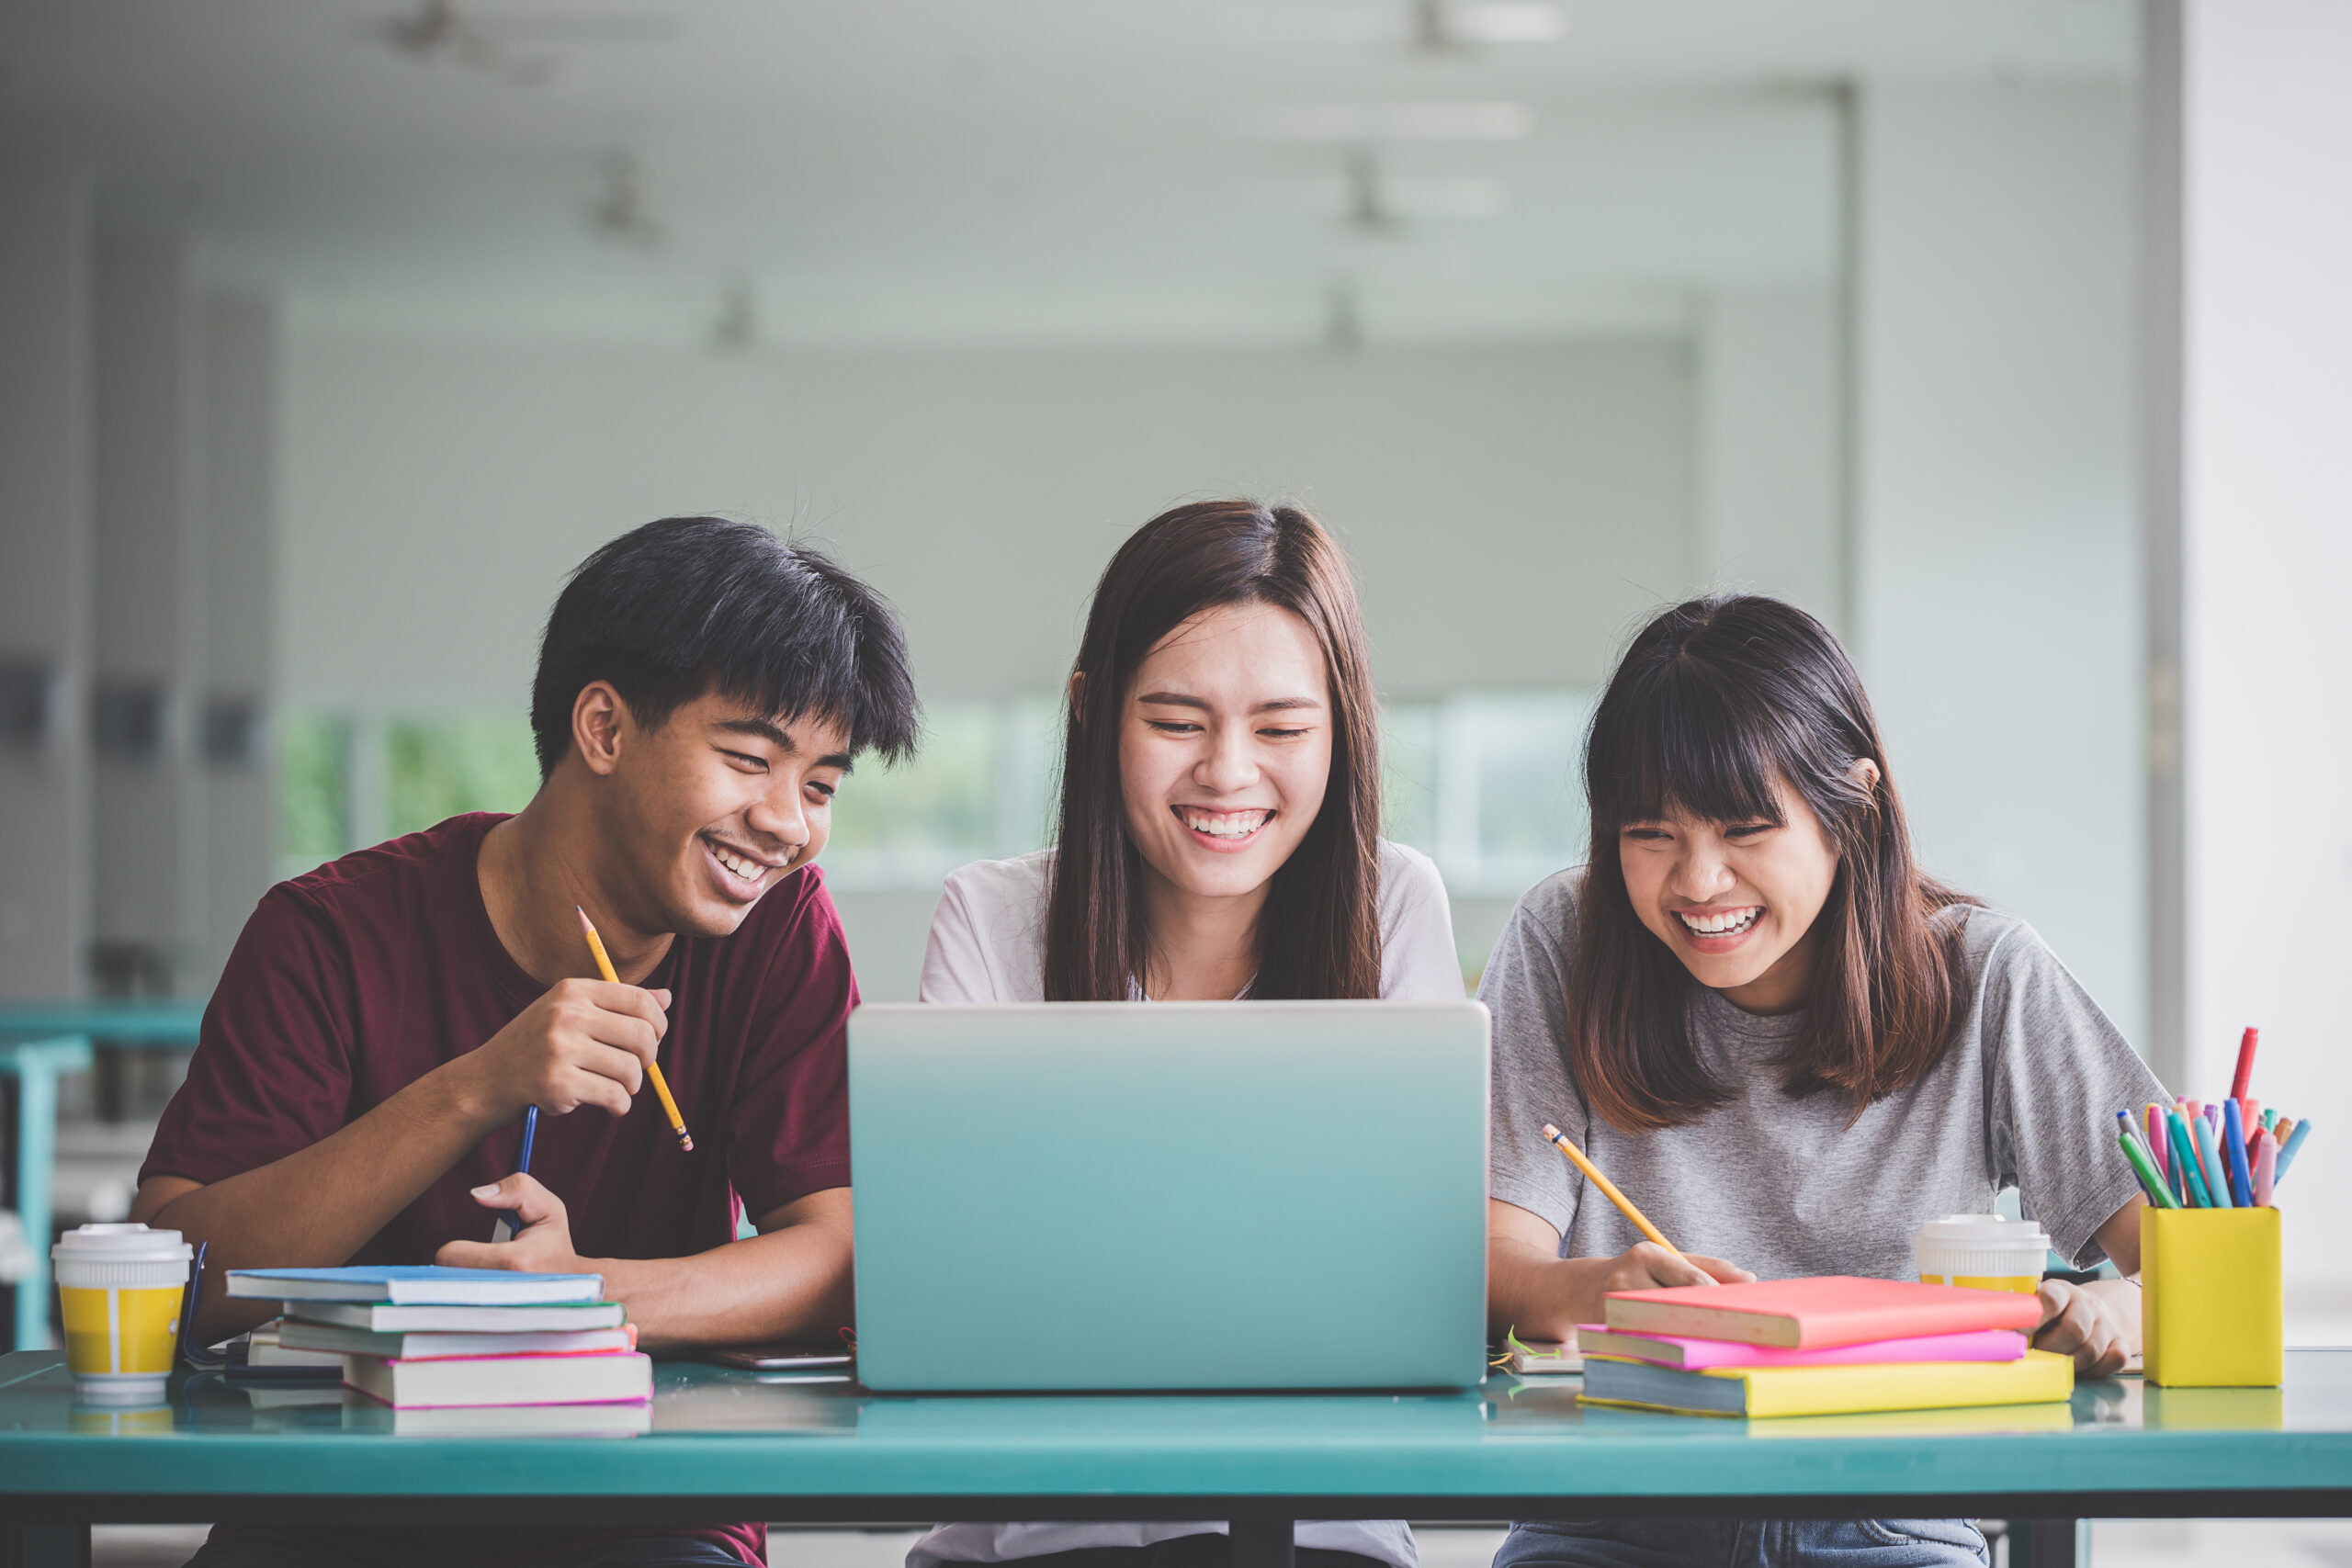 Group of friend or students smile happily with laptop on table